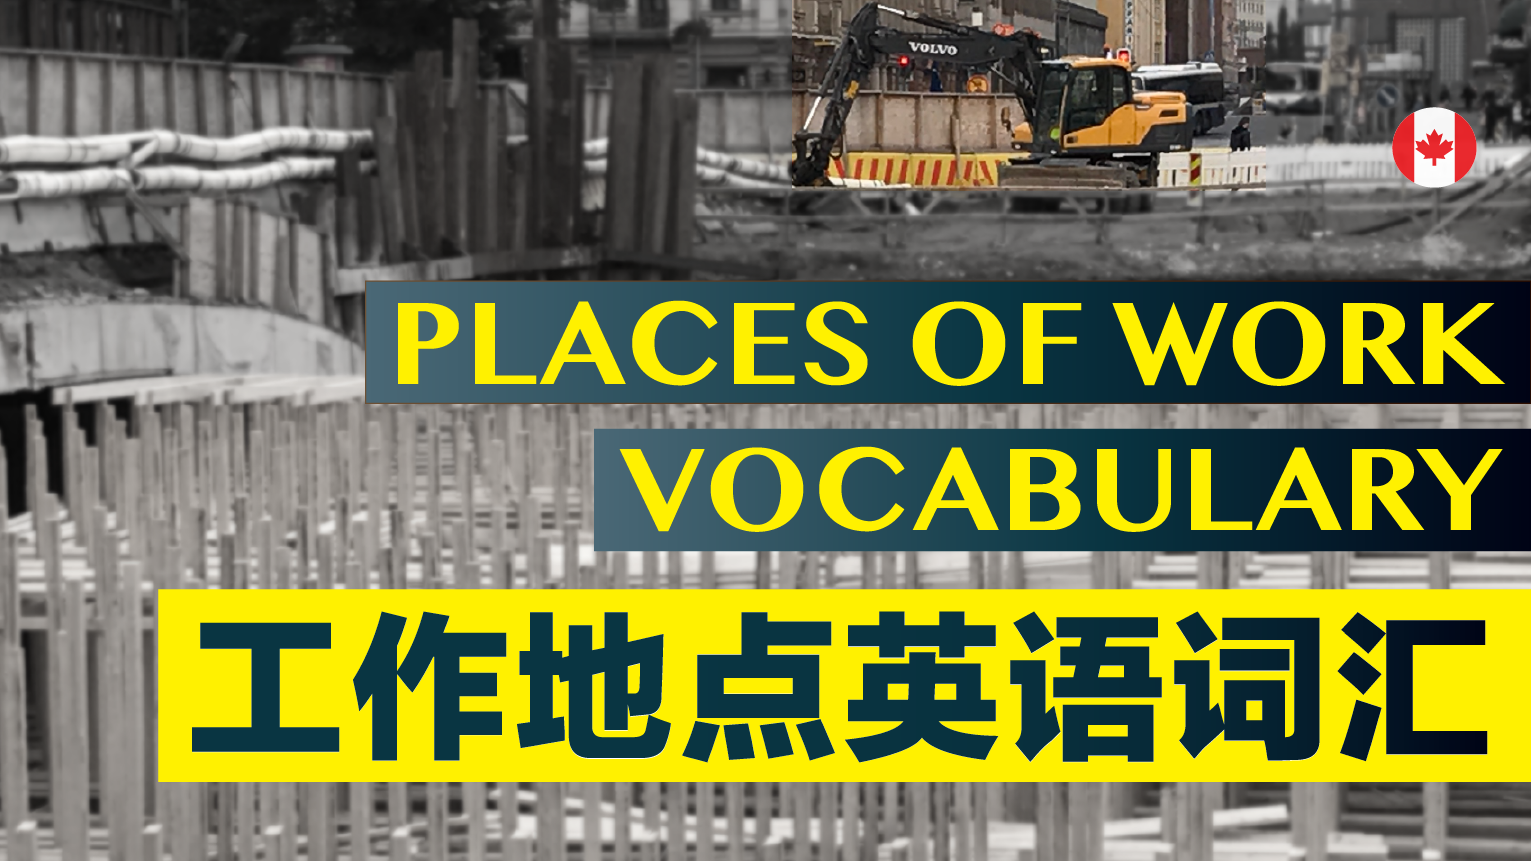 Places of Work Vocabulary